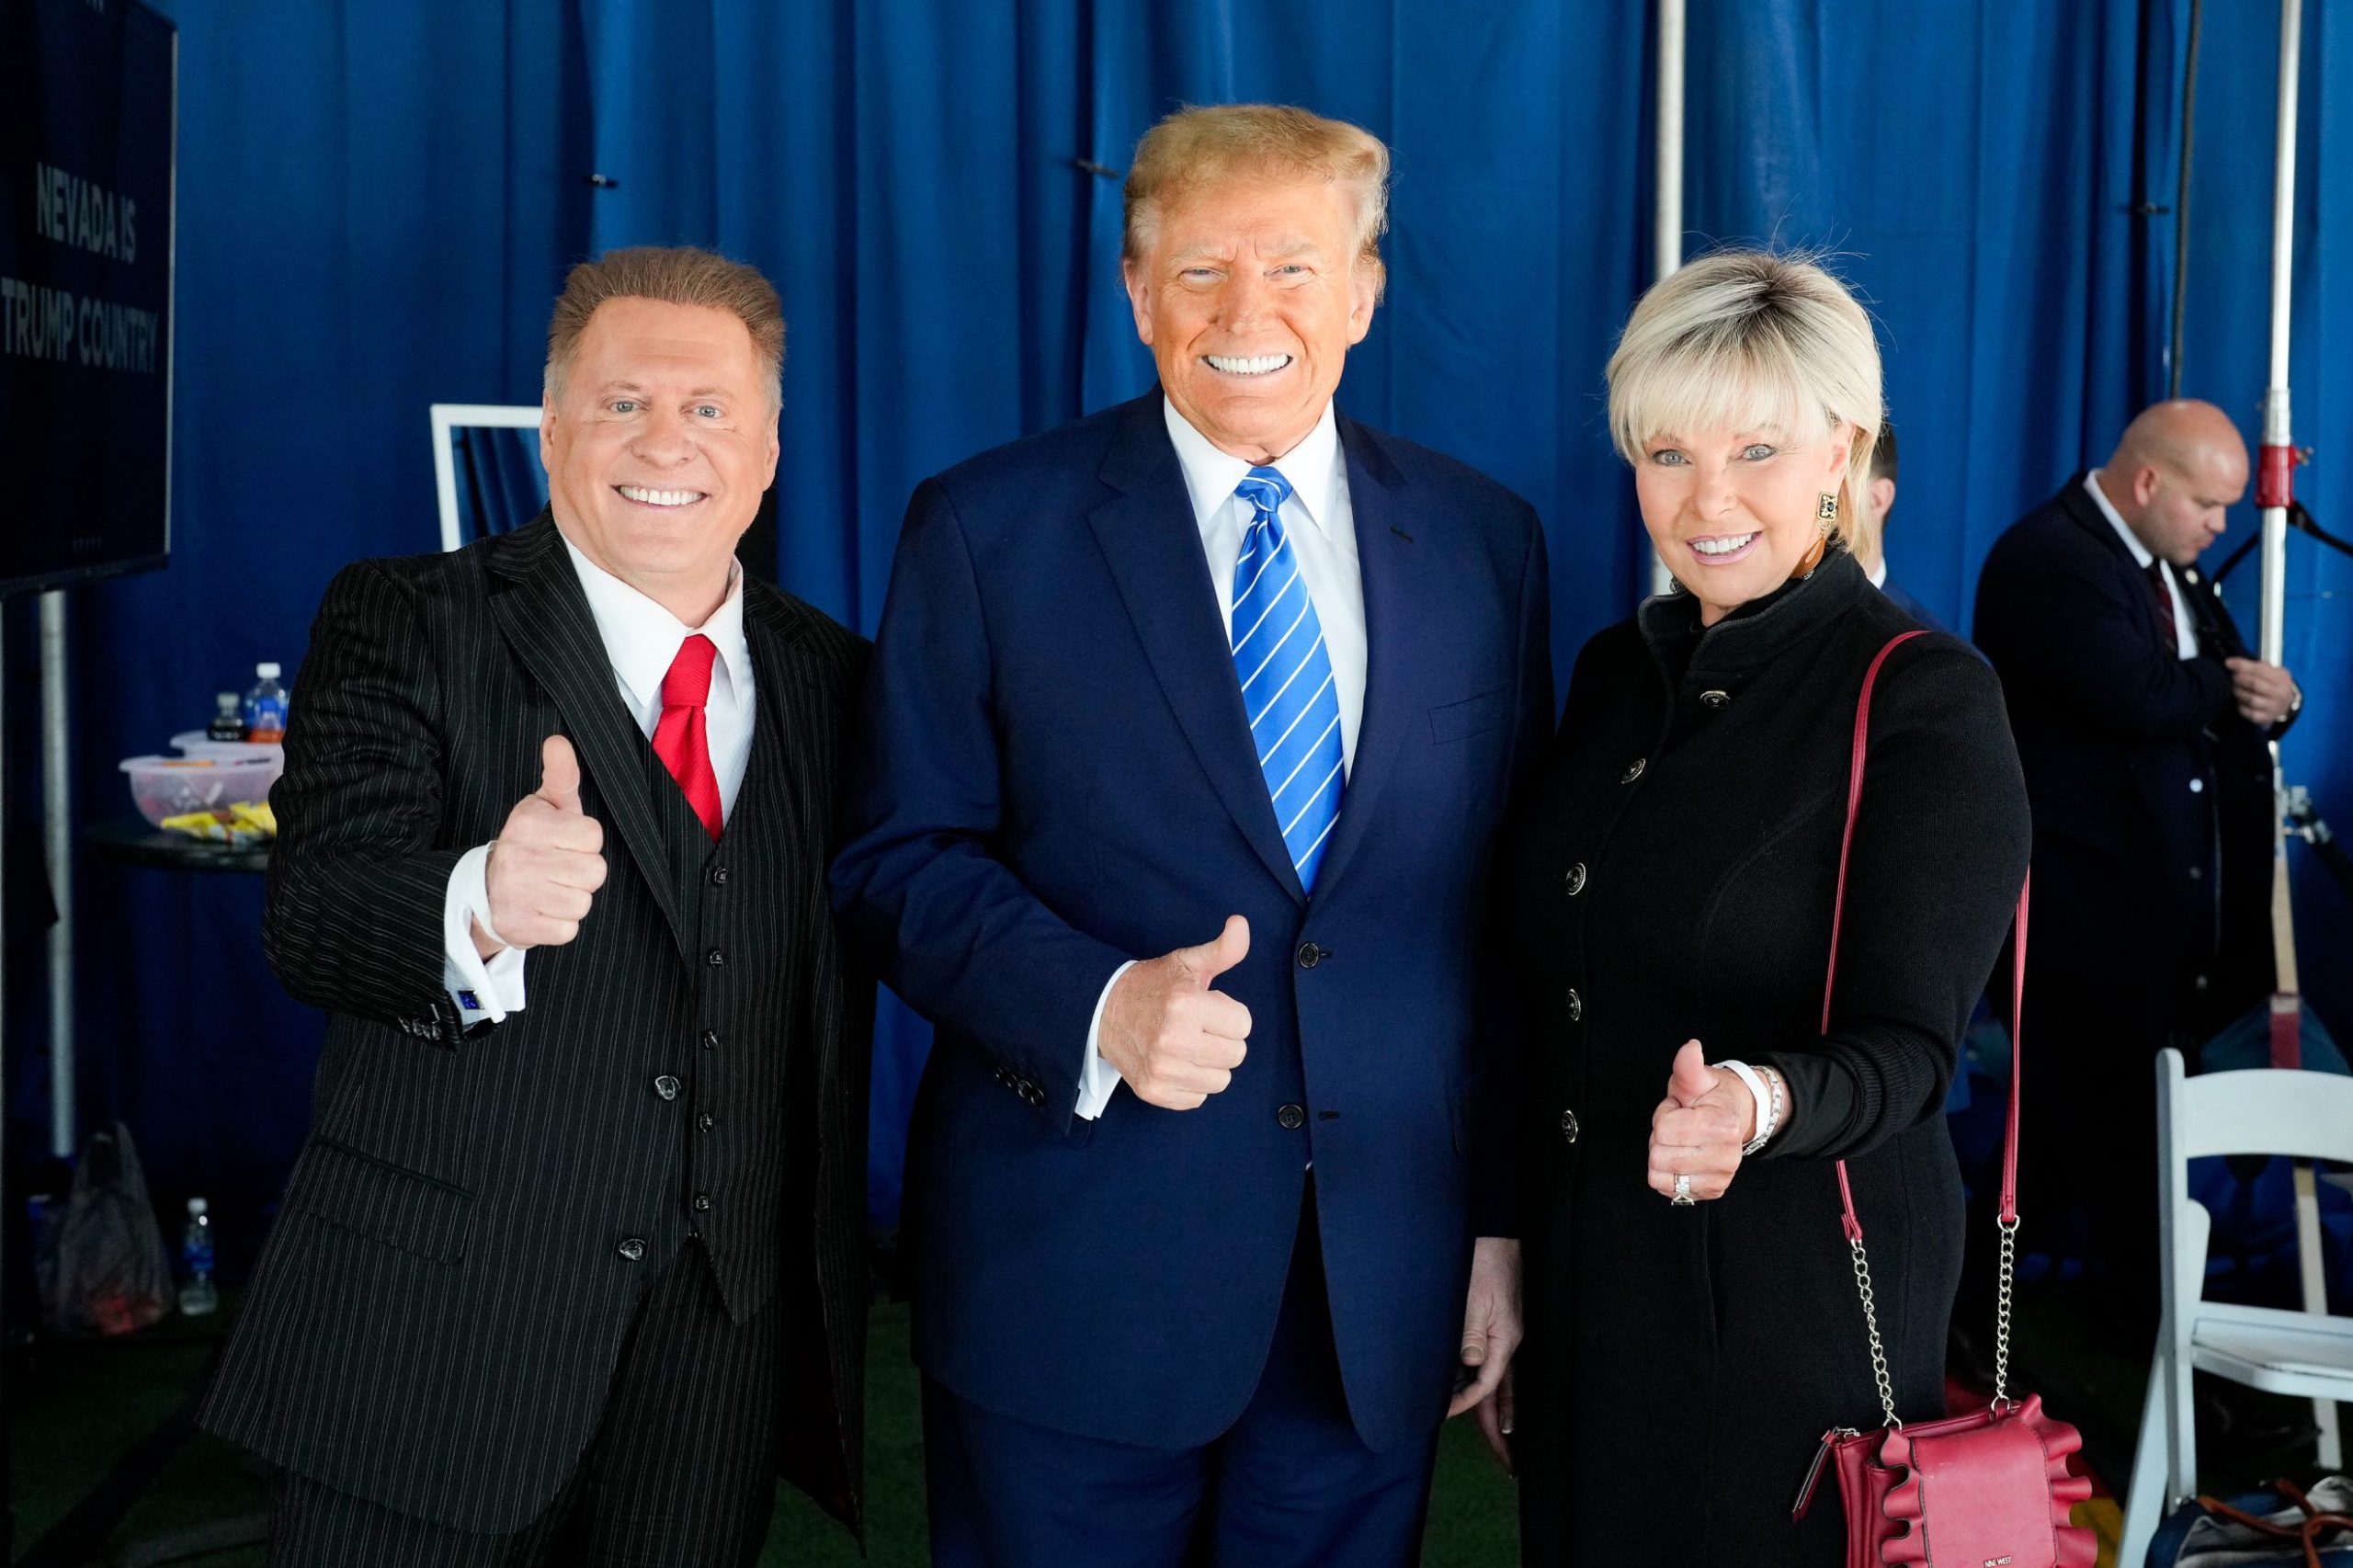 Tune Into Wayne Allyn Root’s 14th Interview with President Trump on Super Bowl Weekend